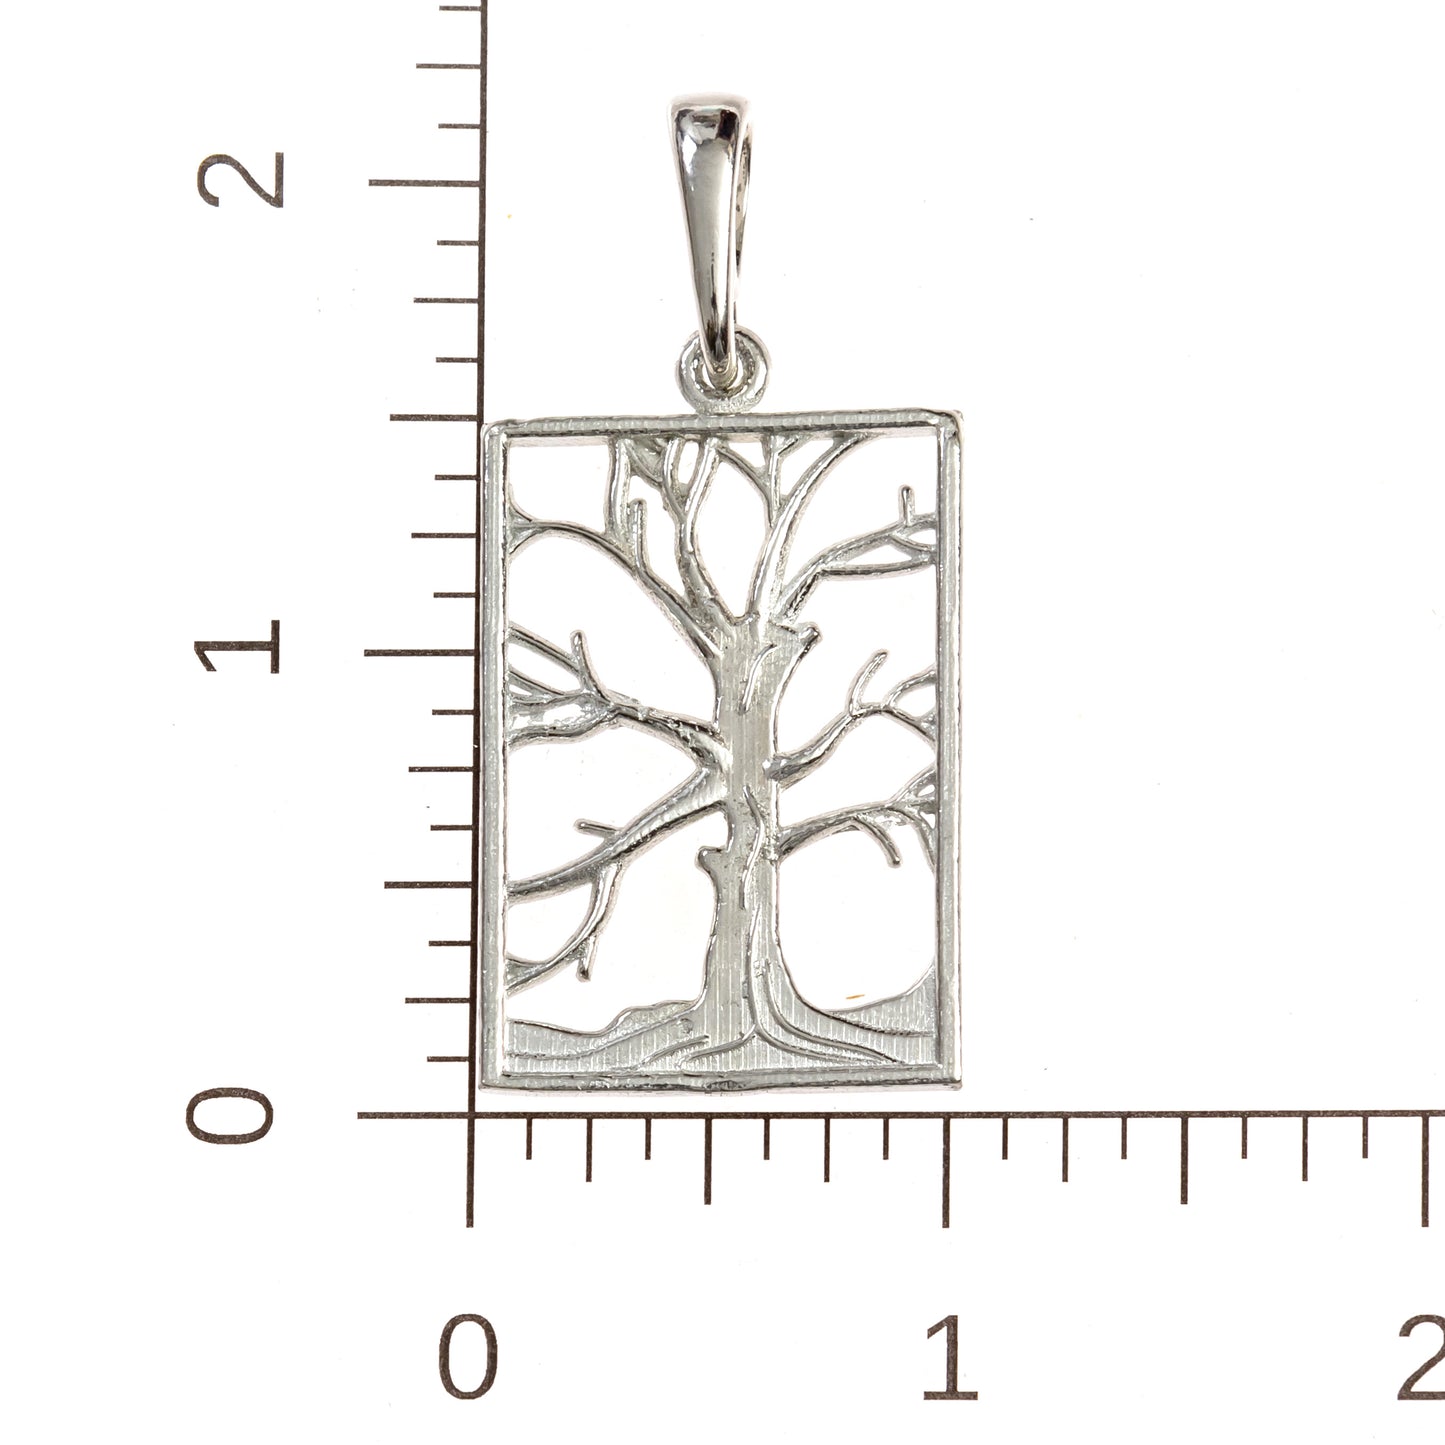 Tree of life Square with no Leaves Jewelry Gifts -Tree of life Square with no Leaves Pendant - Necklaces - Earrings - Keychain